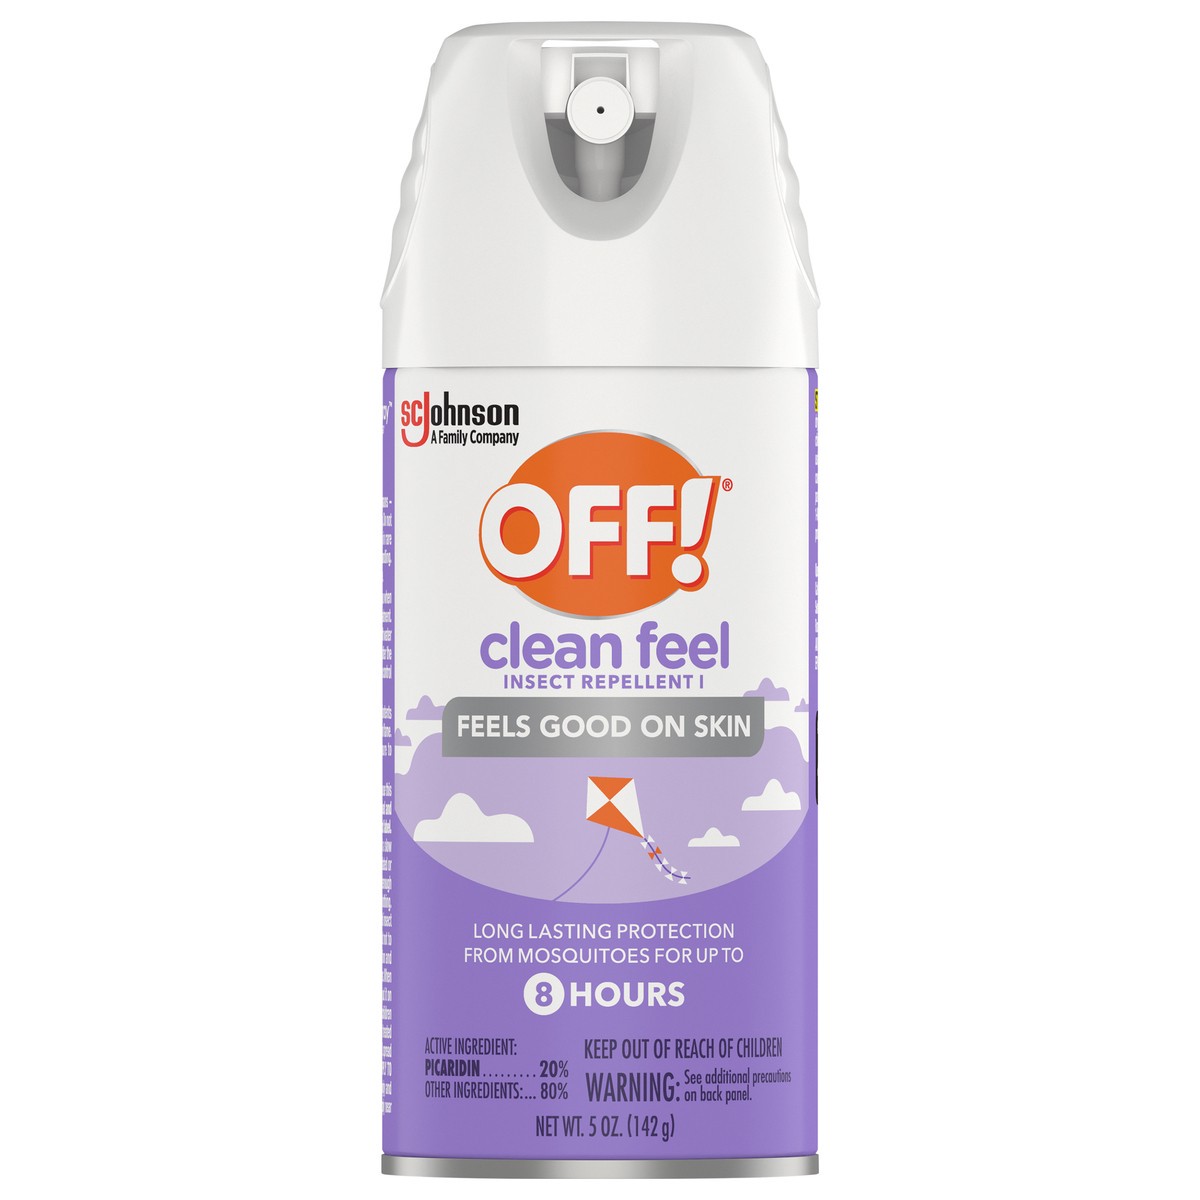 slide 1 of 29, OFF! Clean Feel Insect Repellent I 5 oz, 5 oz